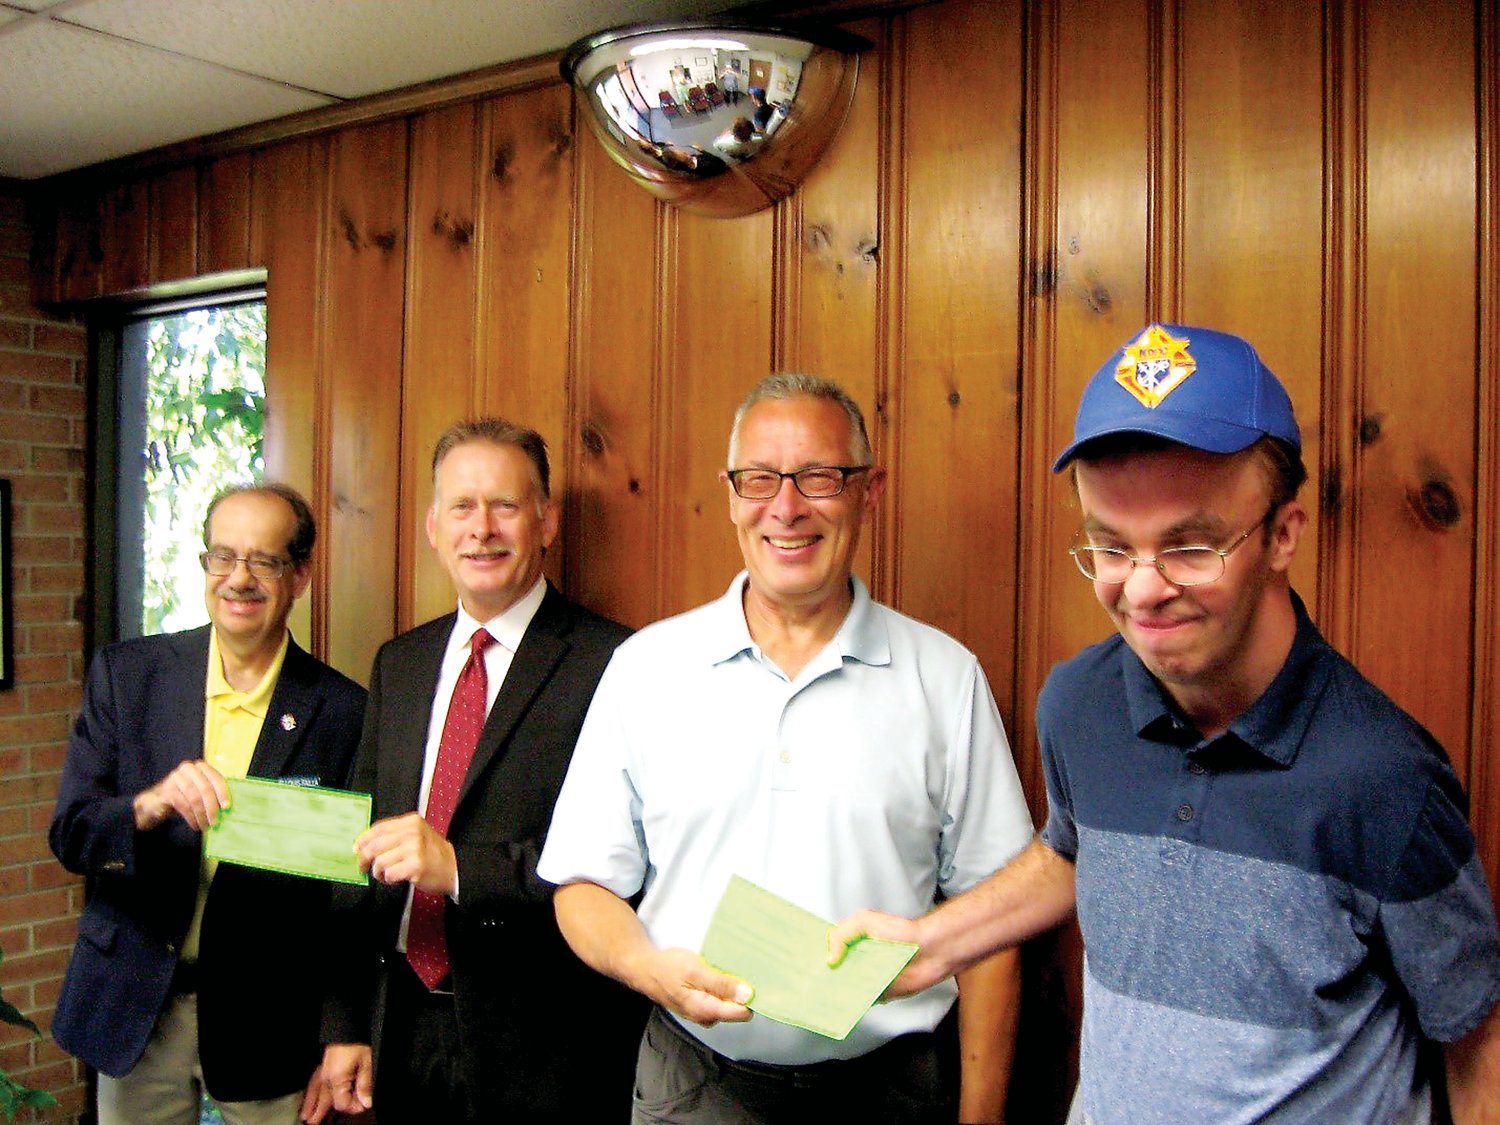 Participating in the check presentation are, from left, Lou Failla, Knights of Columbus Grand Knight (Lambertville Council); Jeff Mattison, executive director, The Arc of Hunterdon County; Michael Skoczek, CEA’s president and CEO; and John Paul Gontarski, Knights of Columbus member as well as CEA Extended Employee and ARC participant.